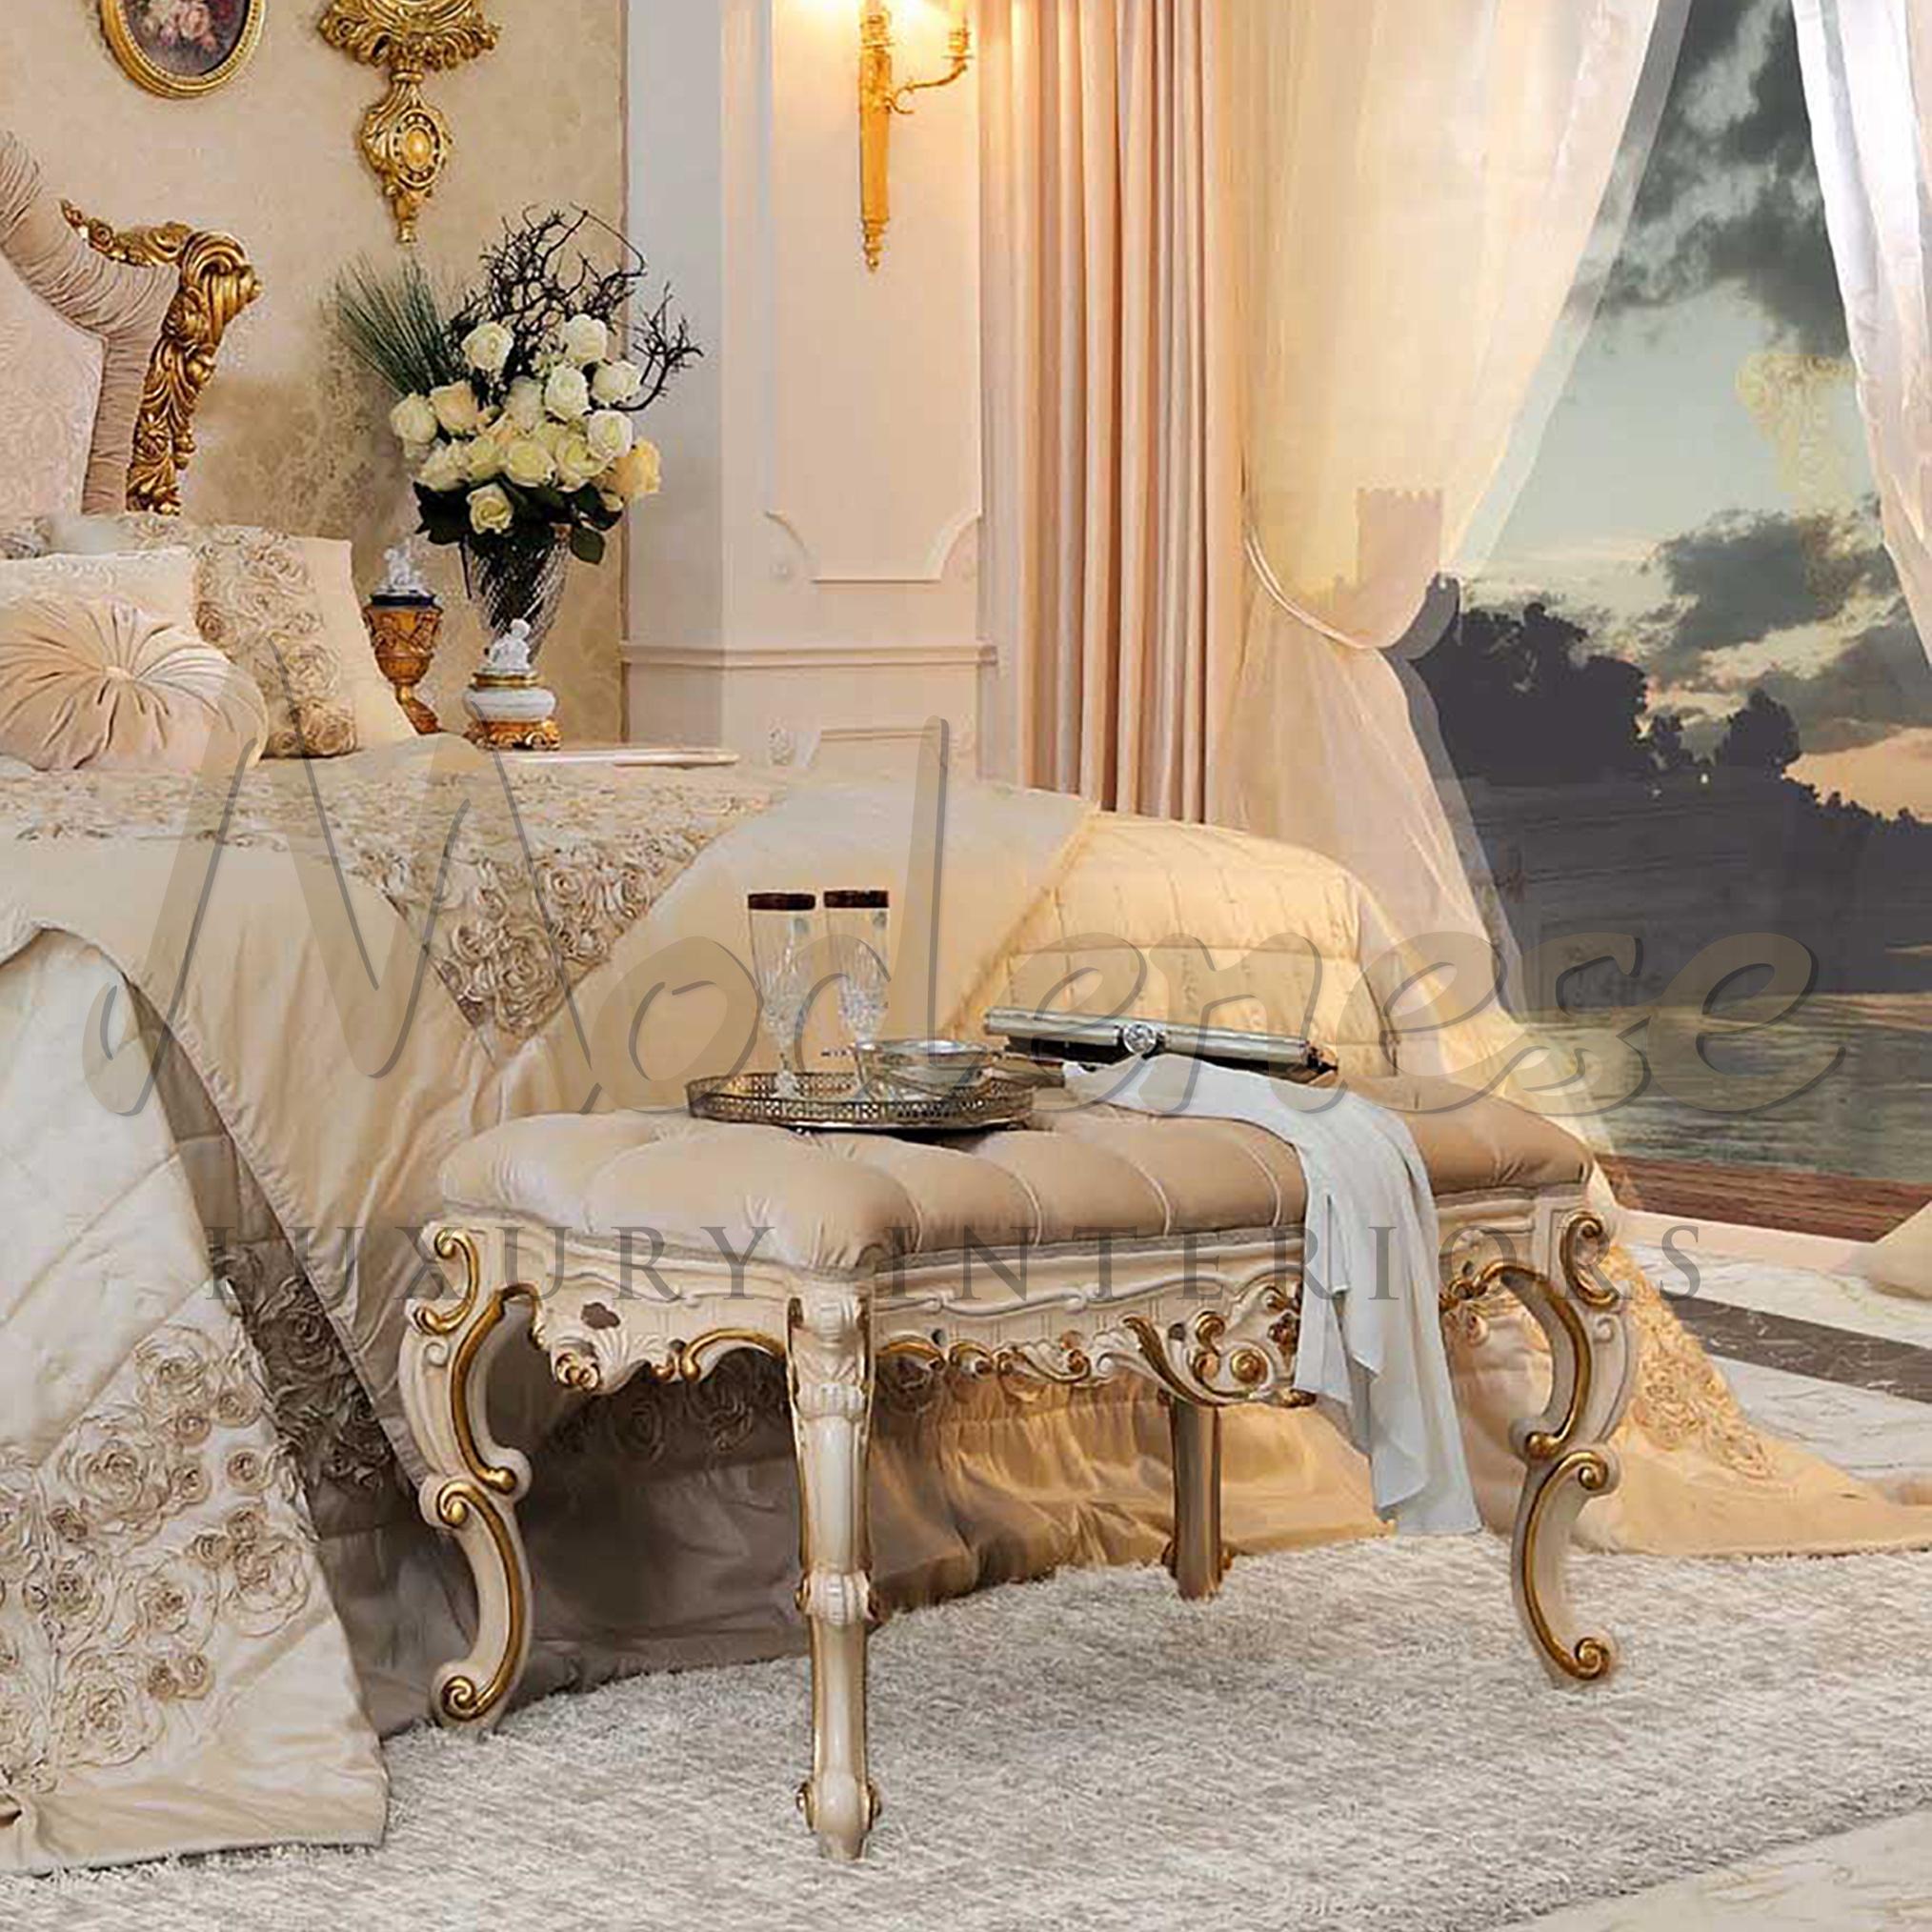 This white baroque bed bench from Modenese Gastone Luxury Interiors, Italian furniture producer, is a superbly elegant yet confortable piece for a classic decor, best showcased in living rooms, bedrooms, lounges, or children's rooms. The sleek